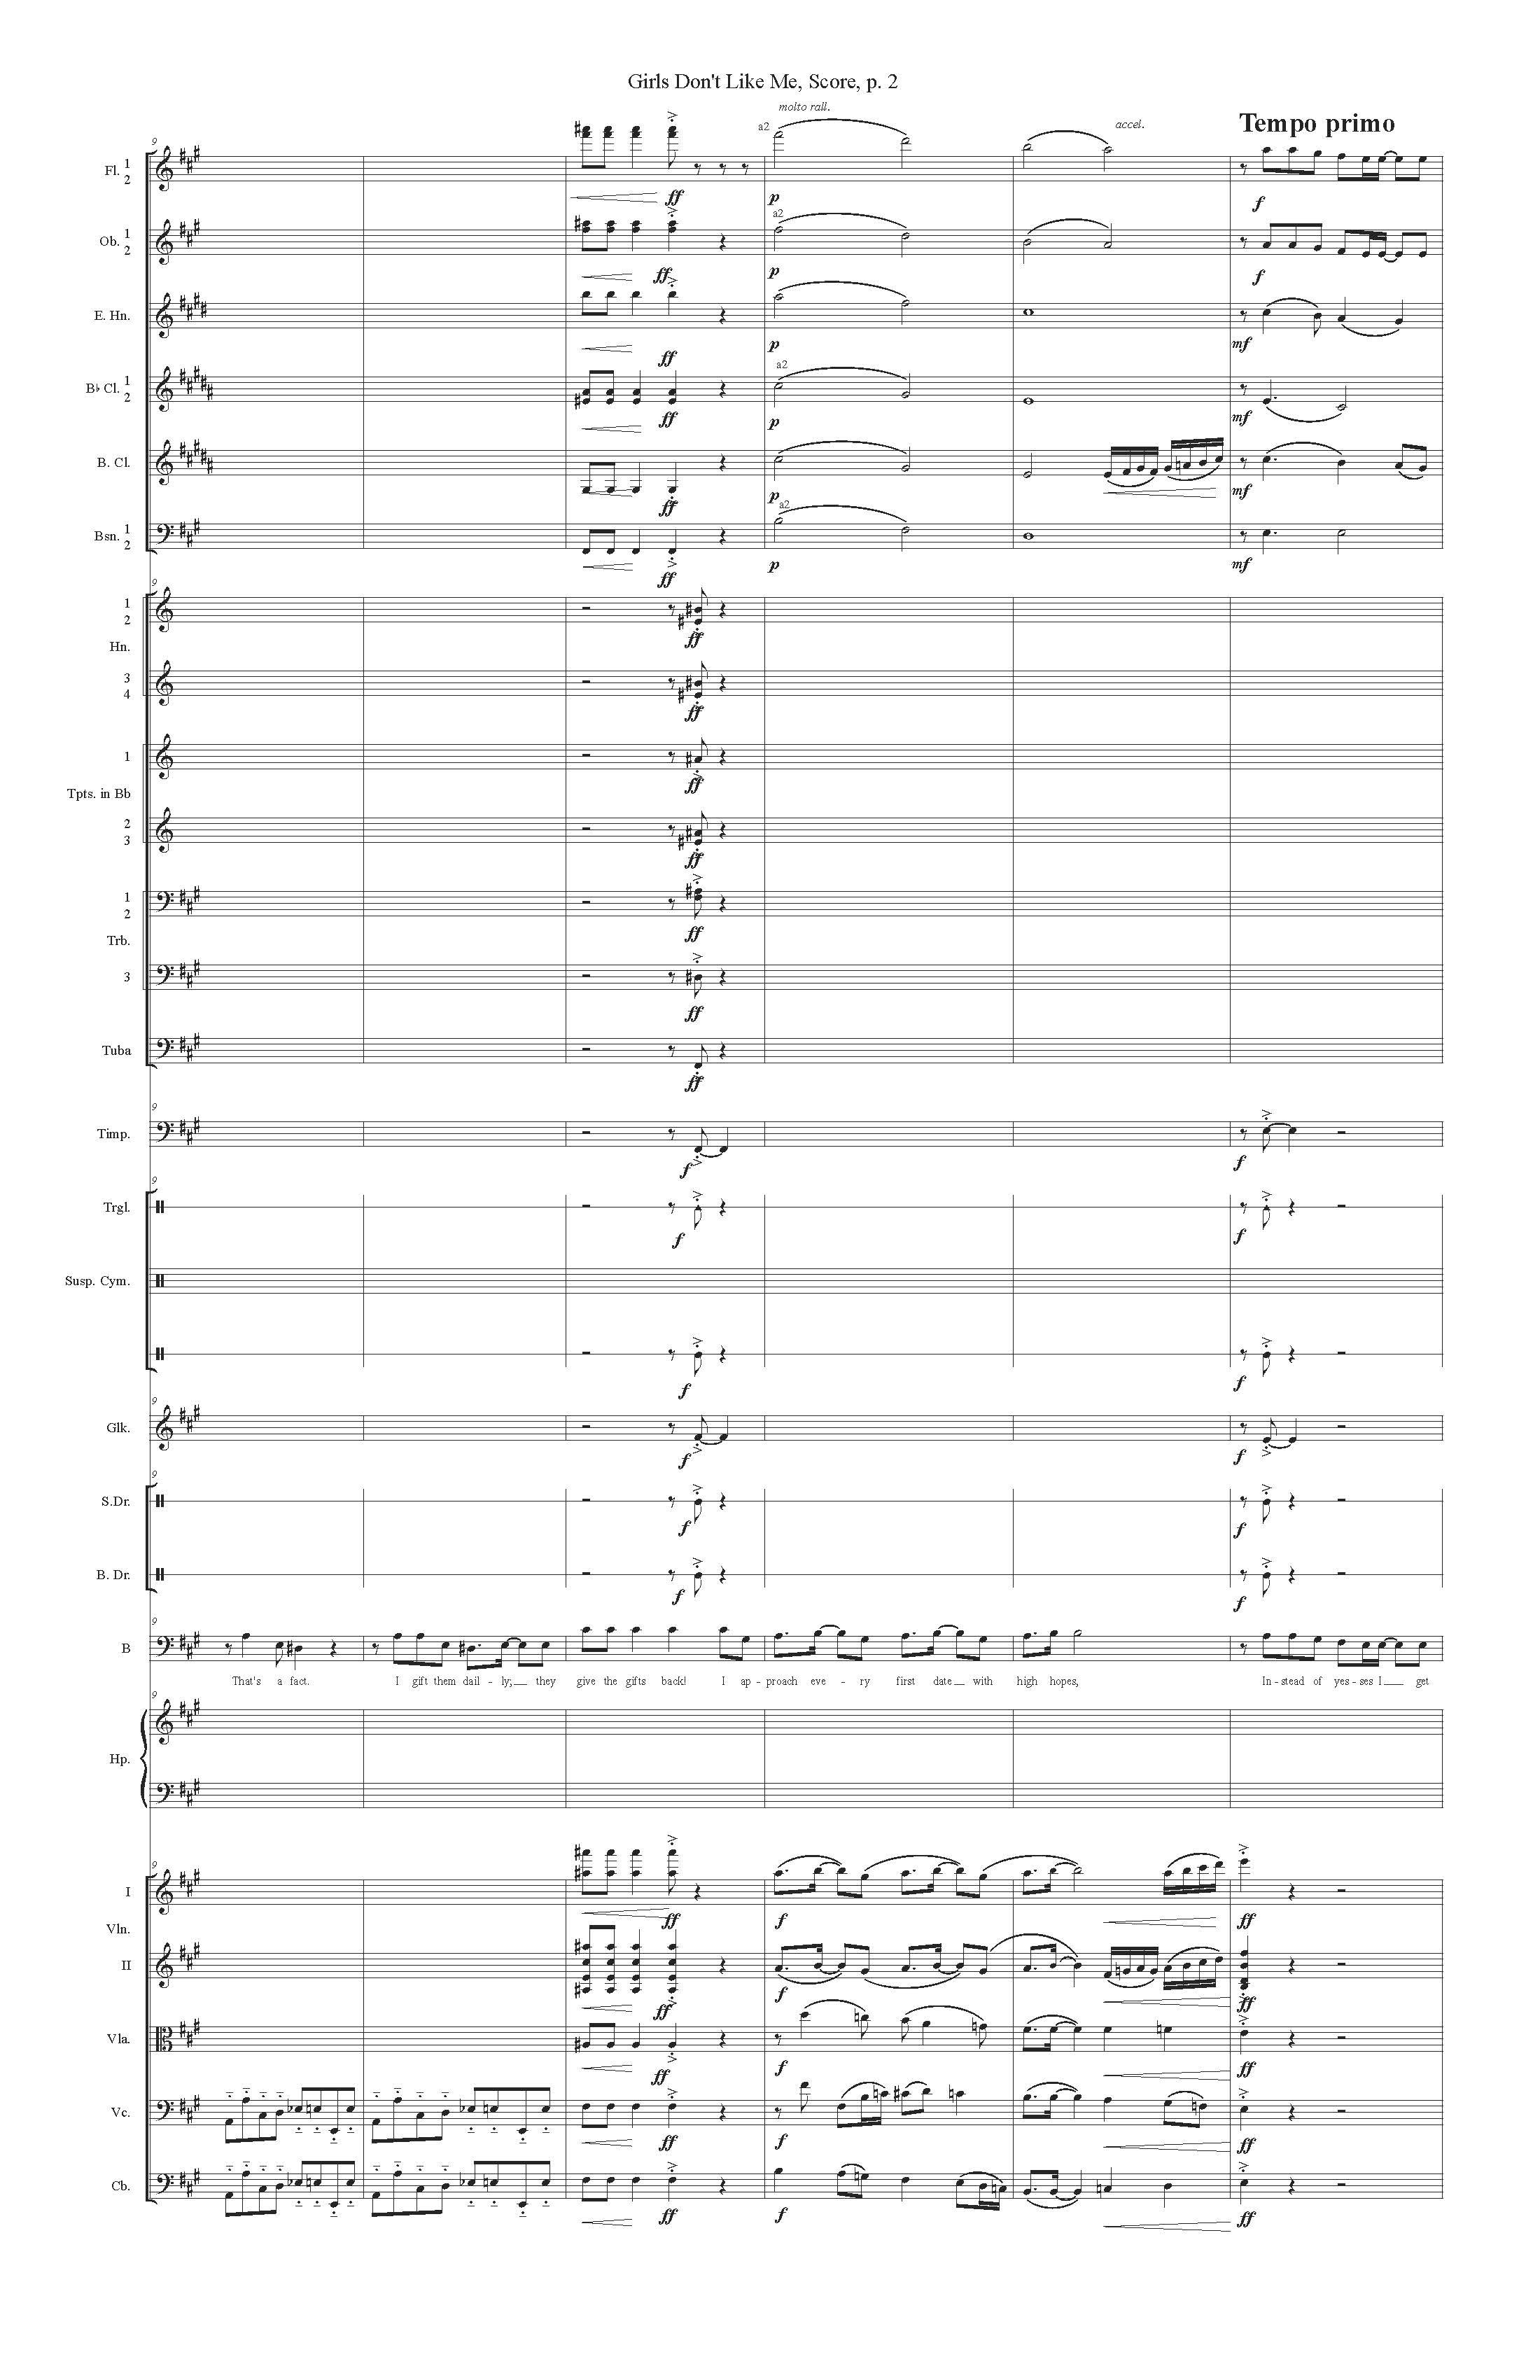 GIRLS DON'T LIKE ME ORCH - Score_Page_02.jpg